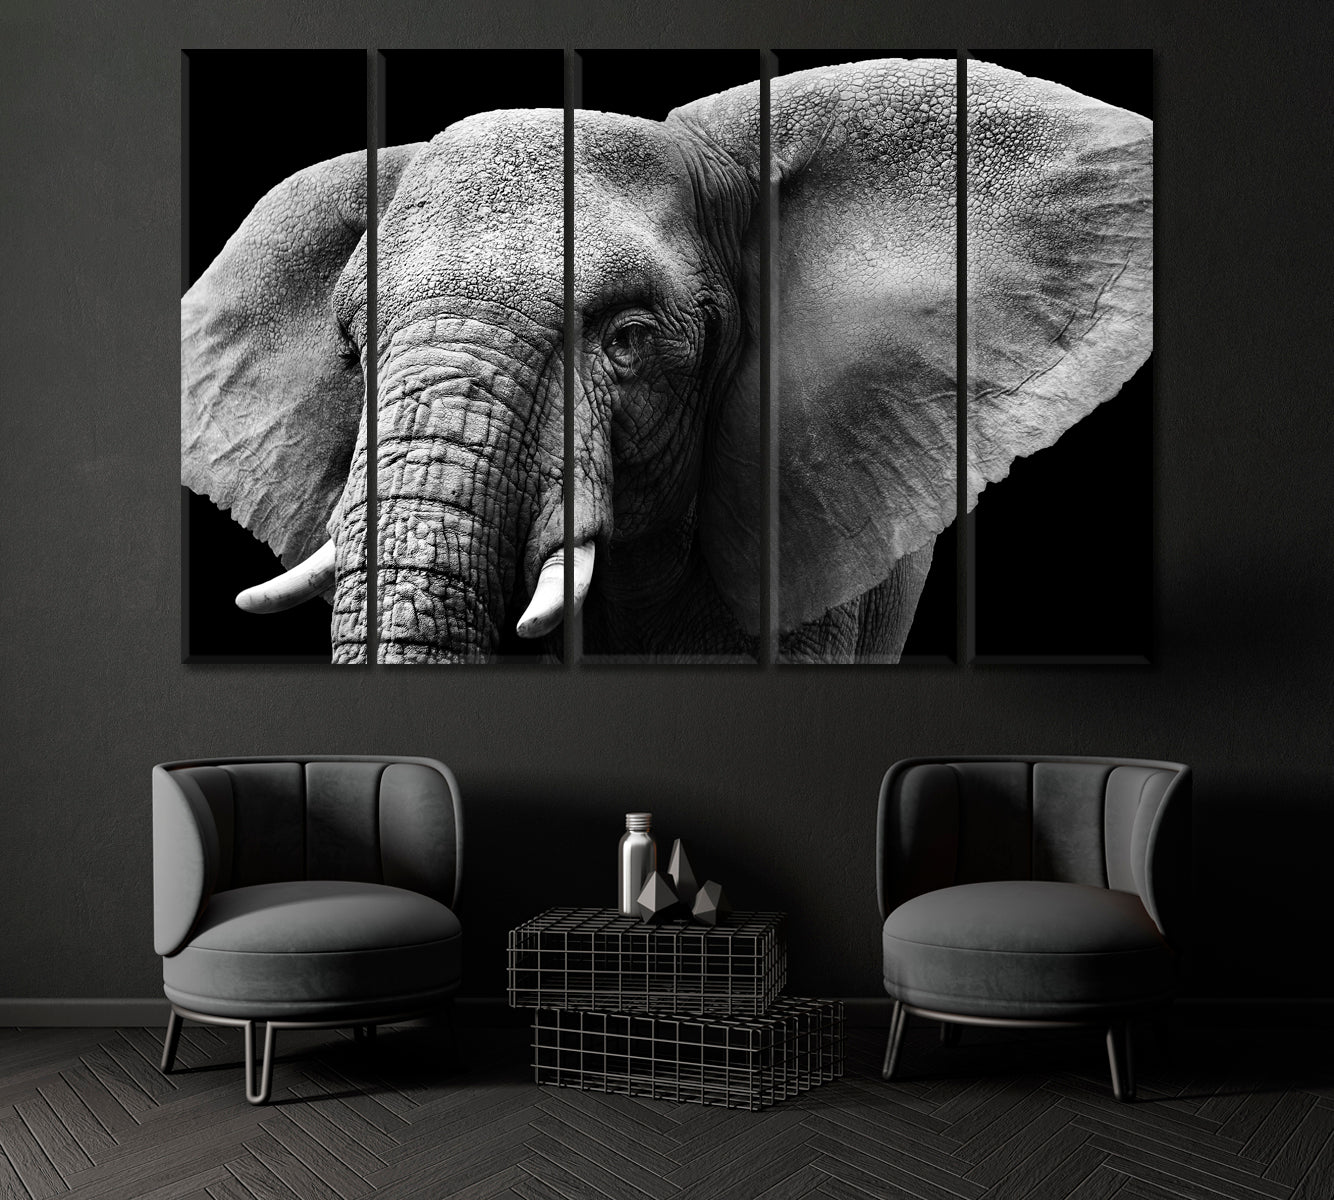 Elephant in Black and White Canvas Print ArtLexy 5 Panels 36"x24" inches 